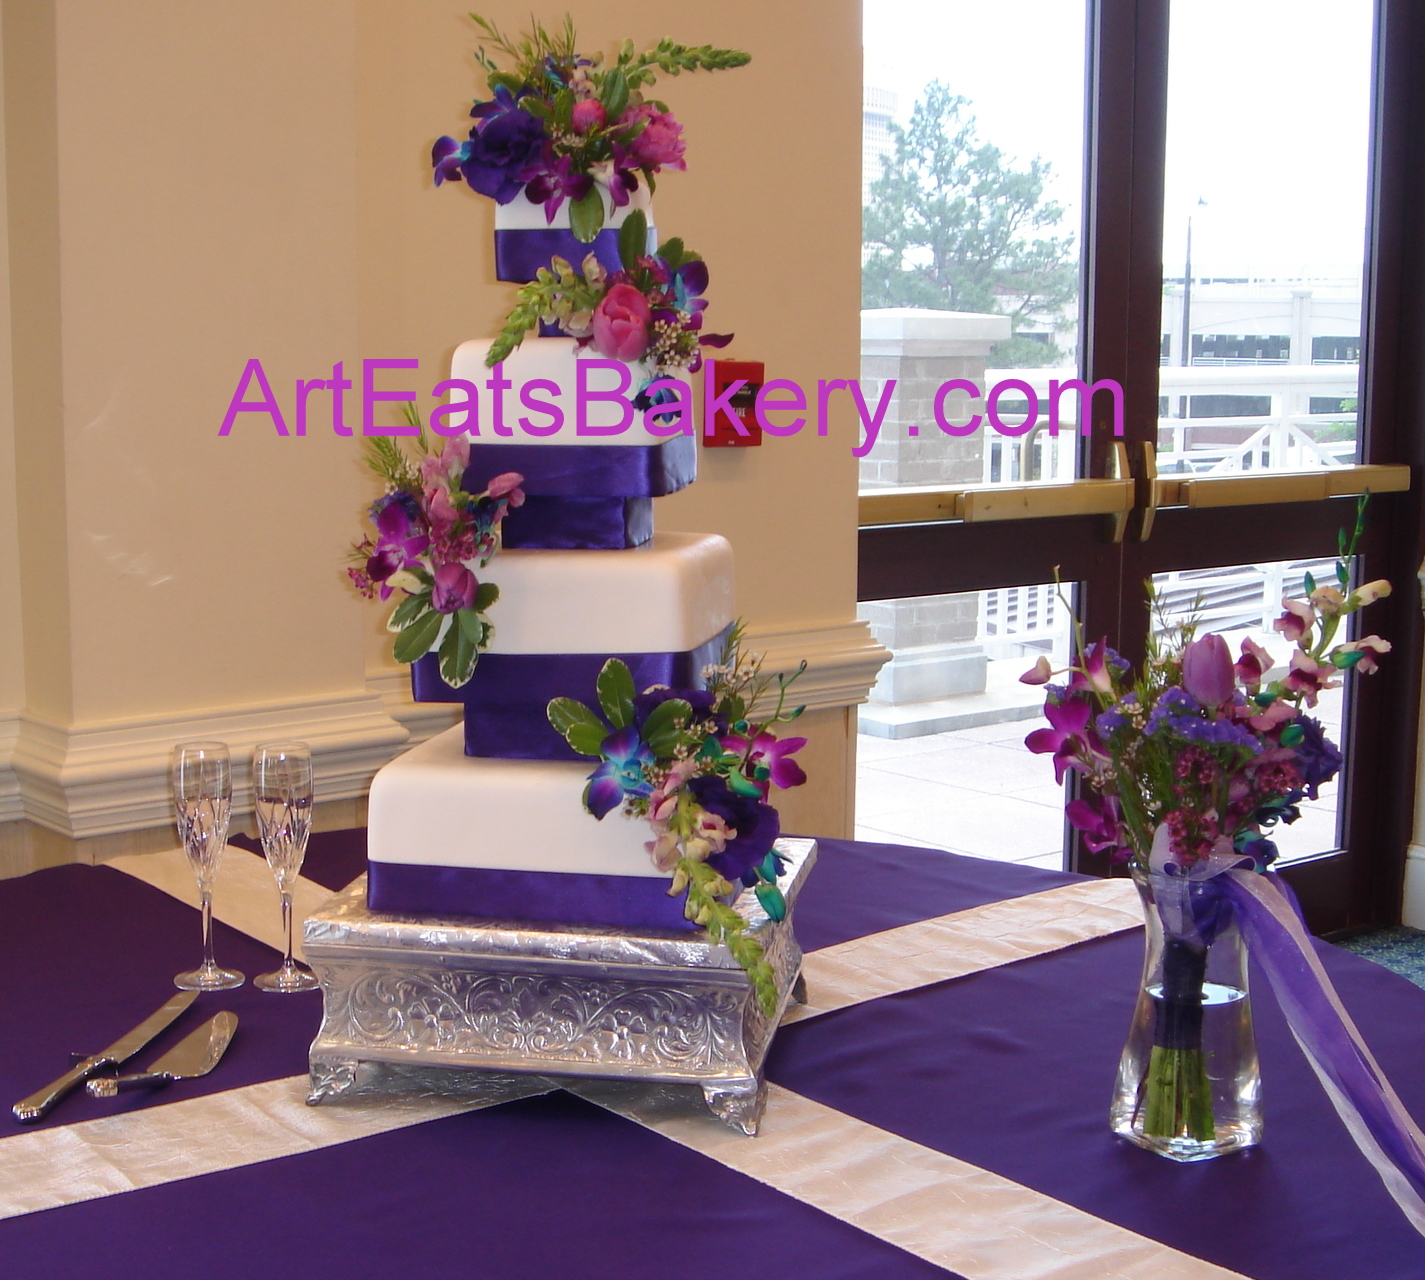 wedding cake ideas with flowers  wedding cake design with Purple ribbons, separators and flowers